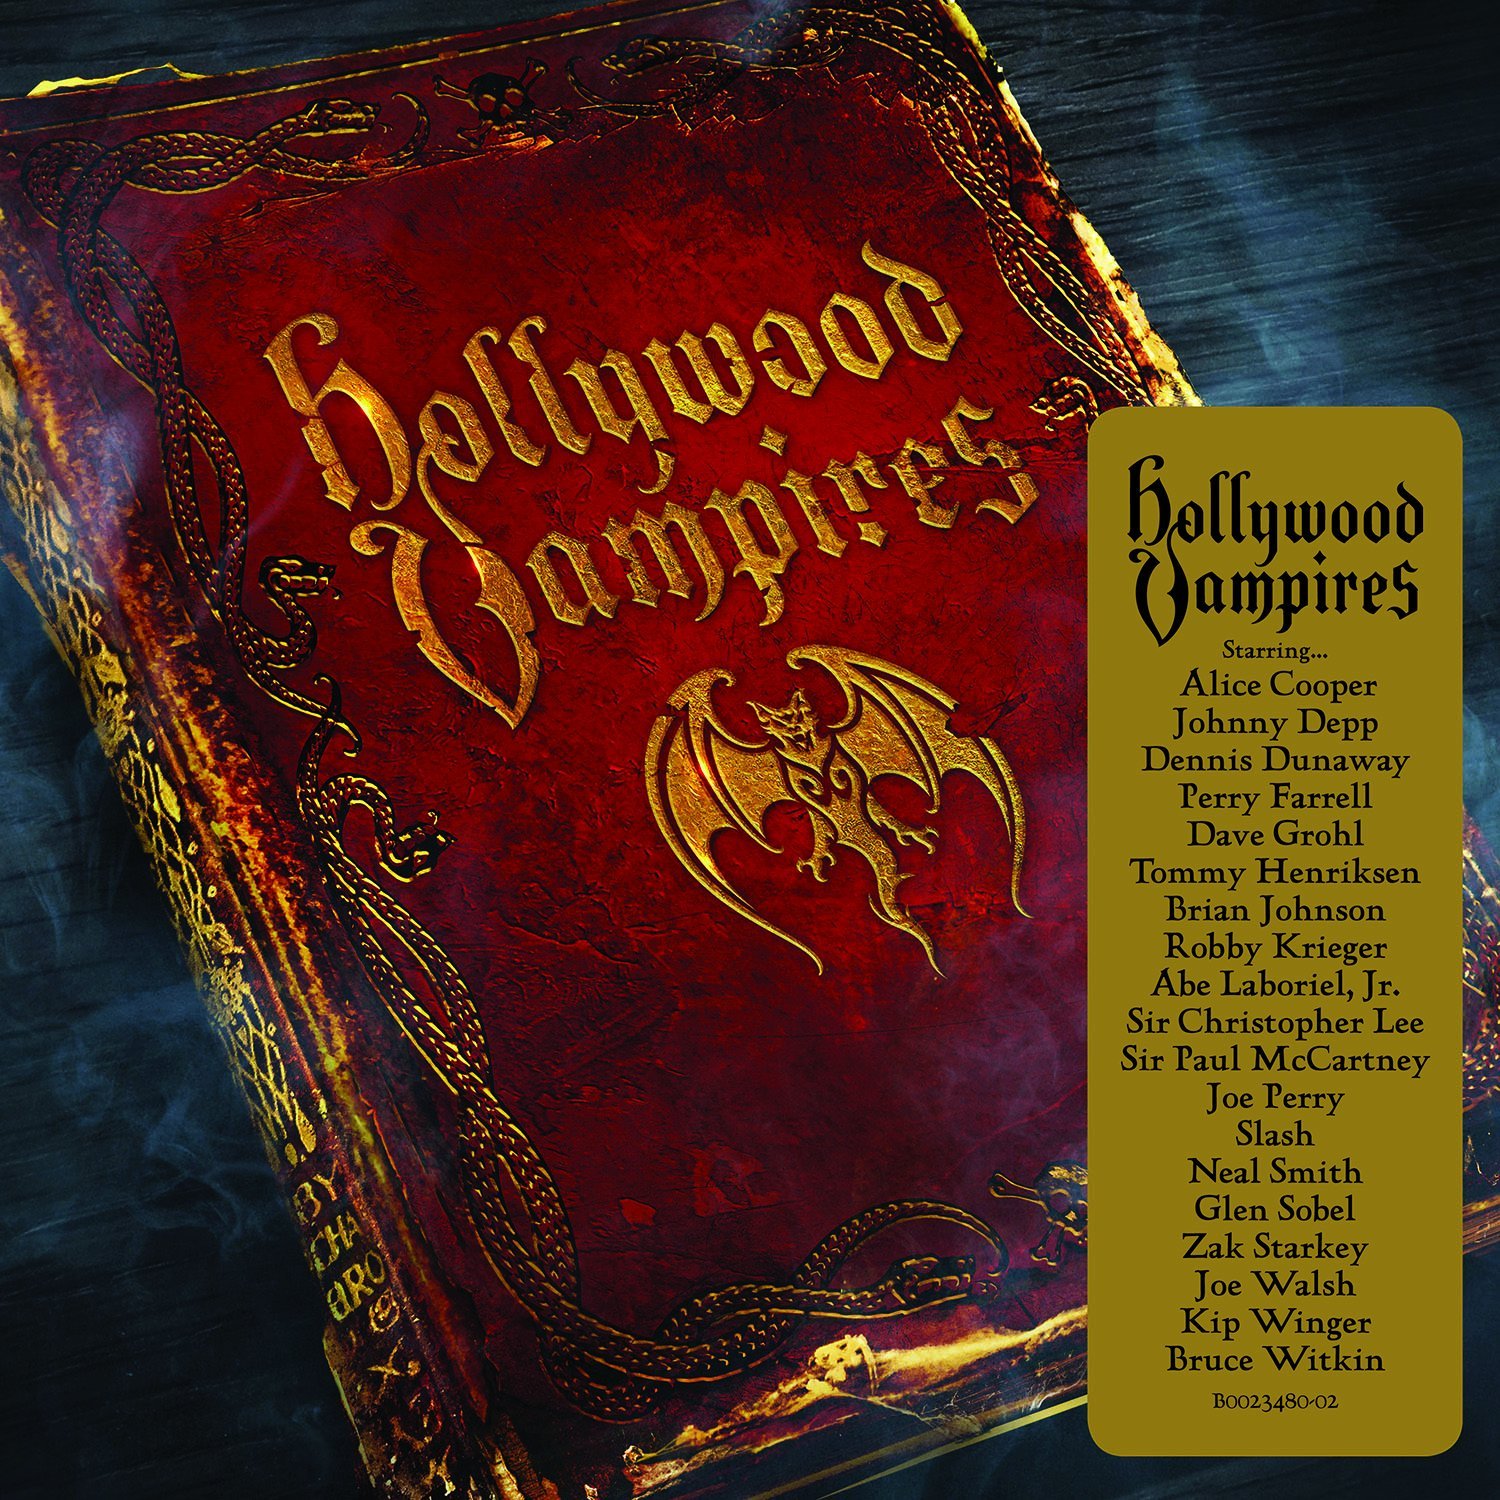 Hollywood Vampires | Alice Cooper, Johnny Depp, Dennis Dunaway, Perry Farrell, Dave Grohl, Joe Perry, Brian Johnson, Robby Krieger, Paul Mccartney